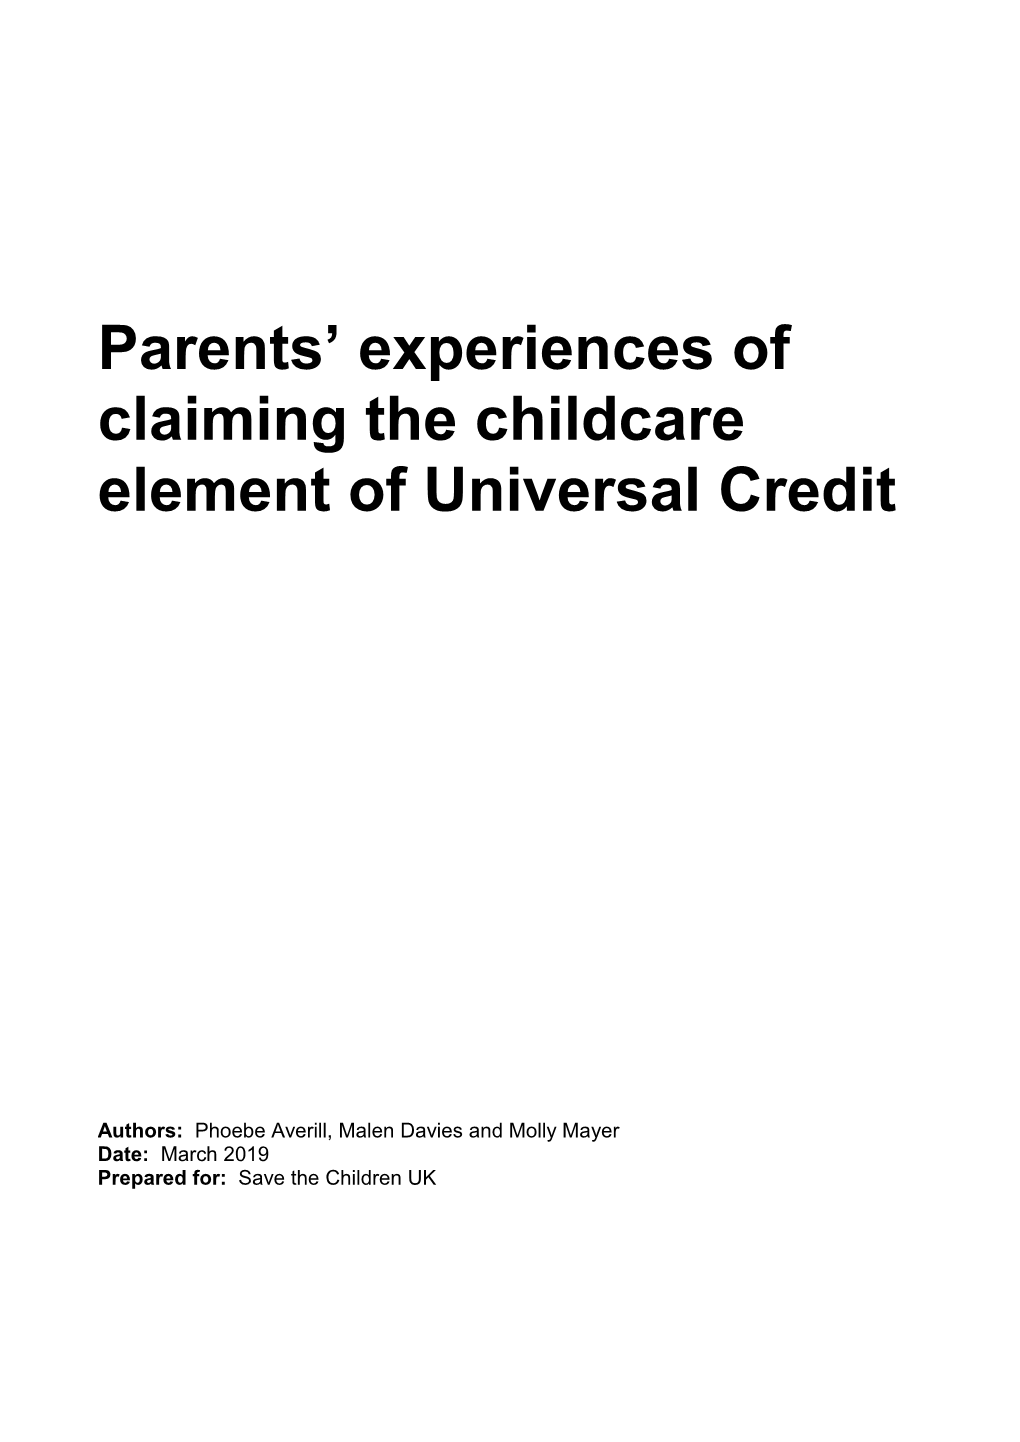 Parents' Experience of Claiming the UC Childcare Element